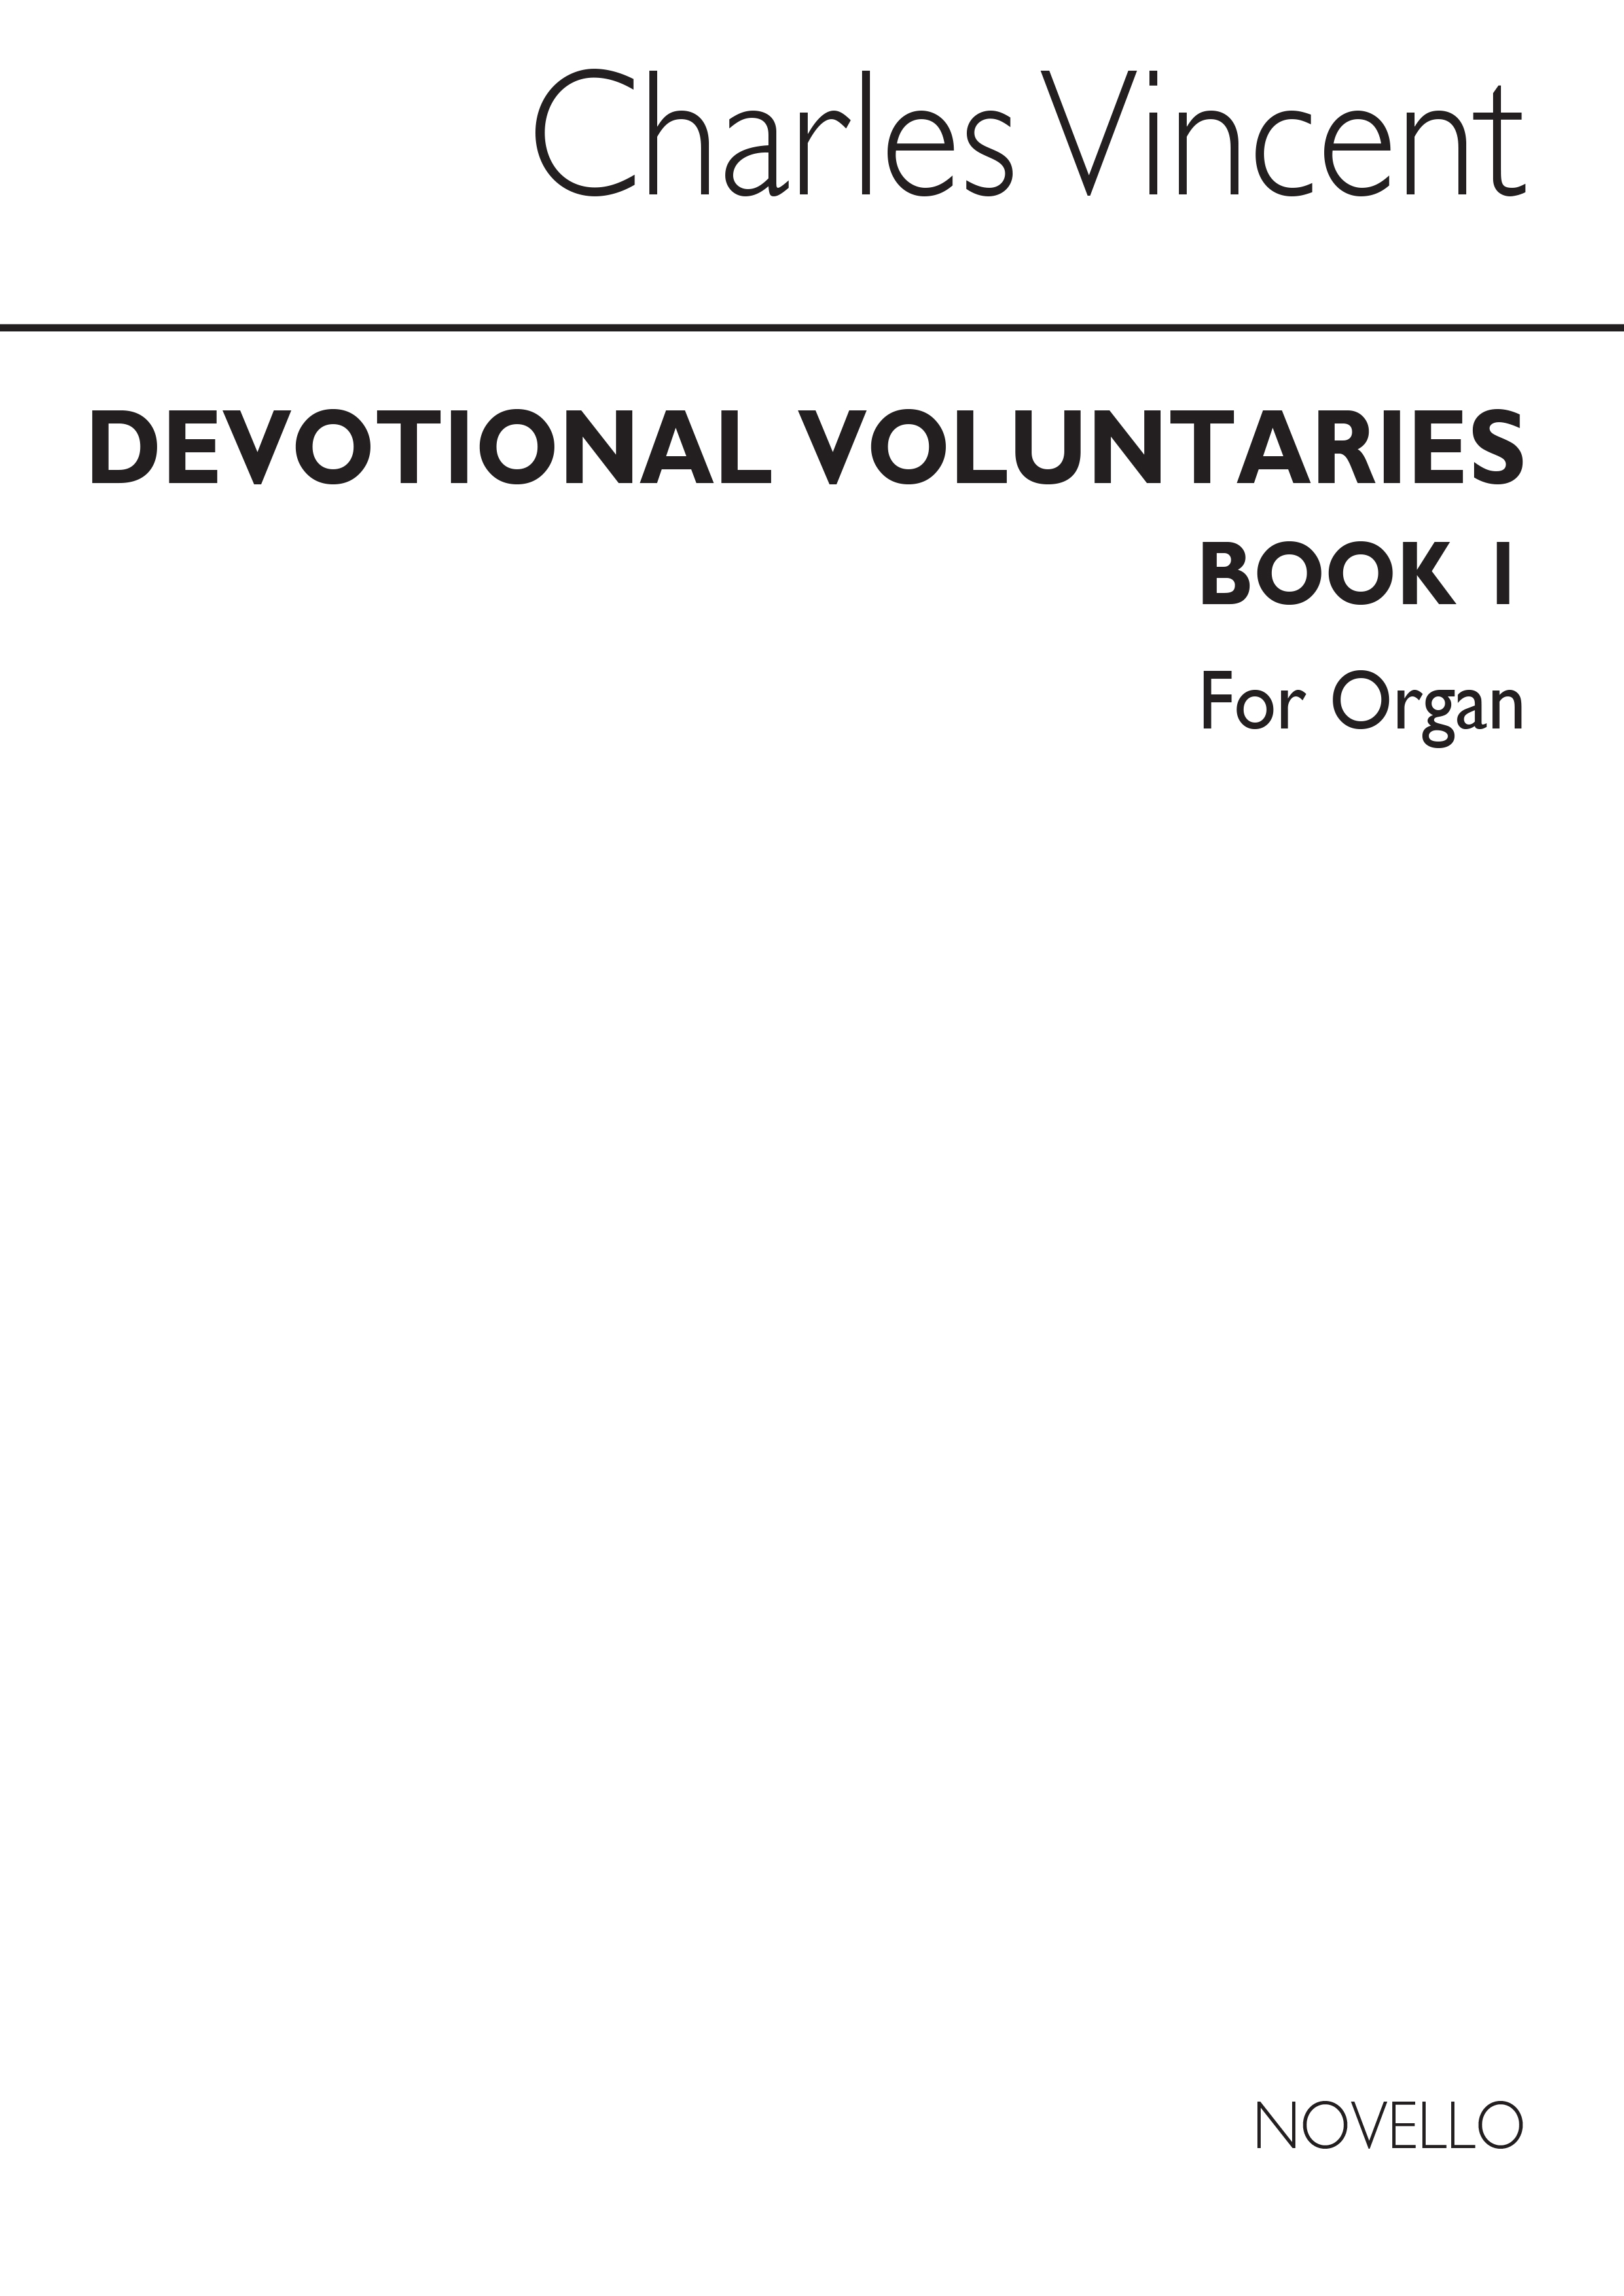 Vincent, C Devotional Voluntaries Book 1 For Organ (Two Staves)